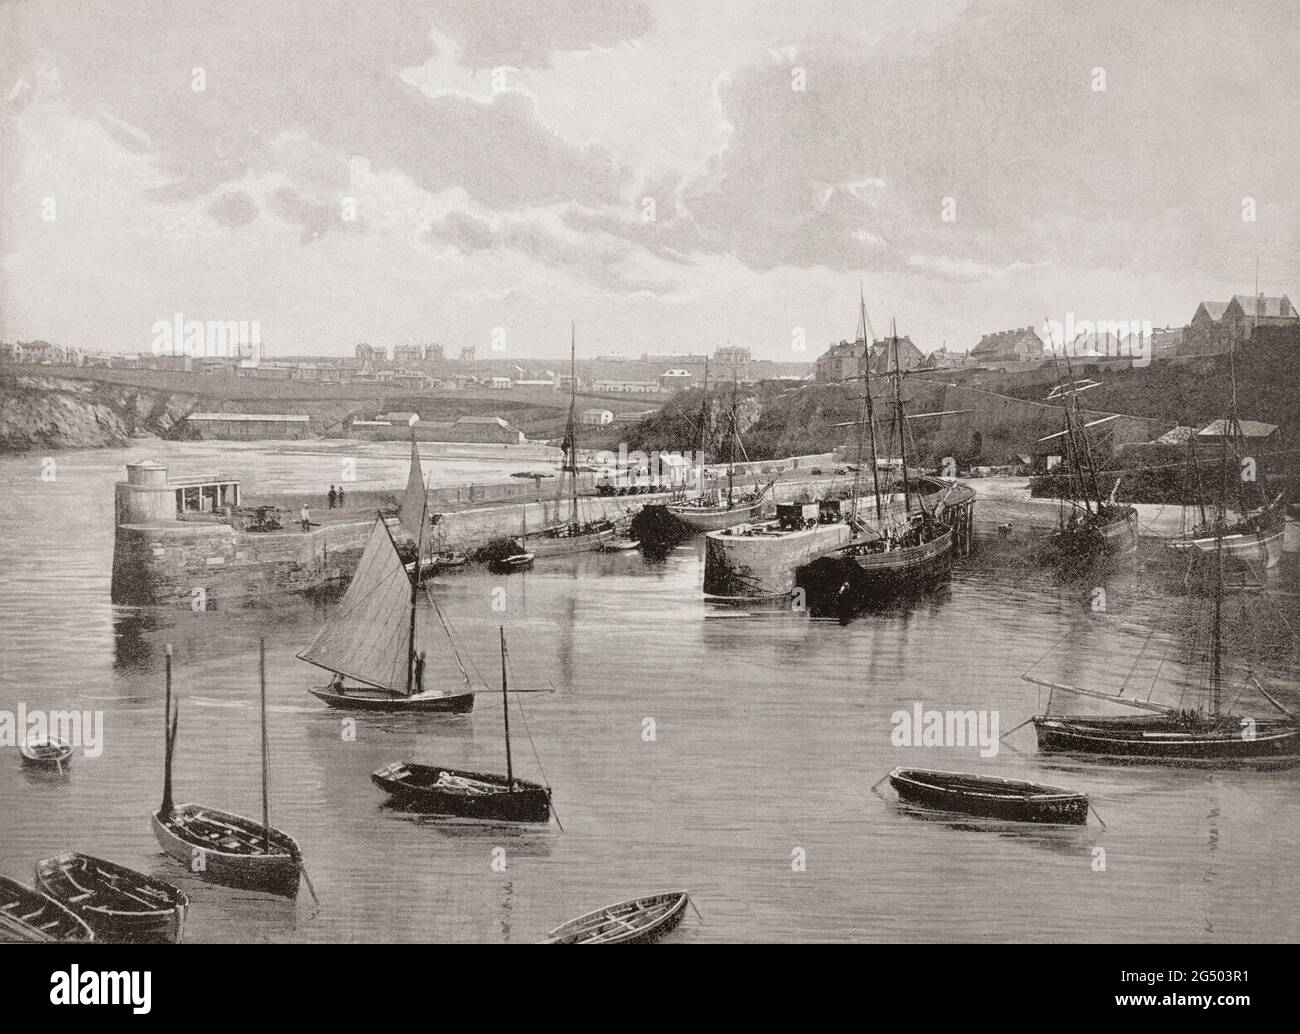 A late 19th century view of the harbour, built in the 1830s, in Newquay, a town on the north coast in Cornwall, in the south west of England. The fishing port and seaside resort on the North Atlantic coast of Cornwall, England is now a popular surfing centre. Stock Photo